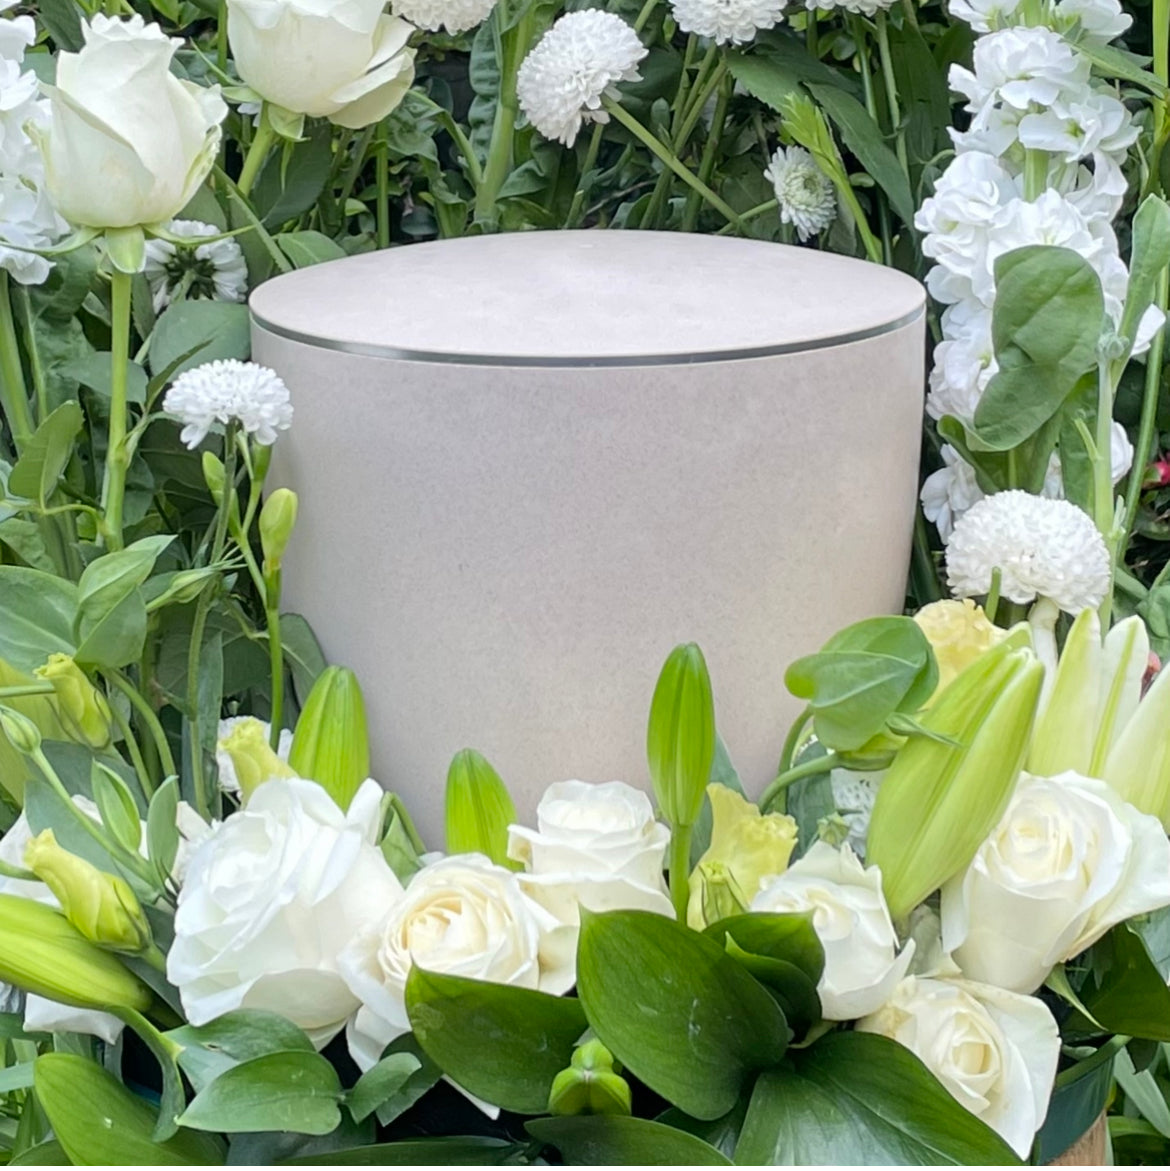 Stunning off-white coloured cremation urn with a delicate silver ring set in a beautiful flower arrangement of white flowers and foliage..